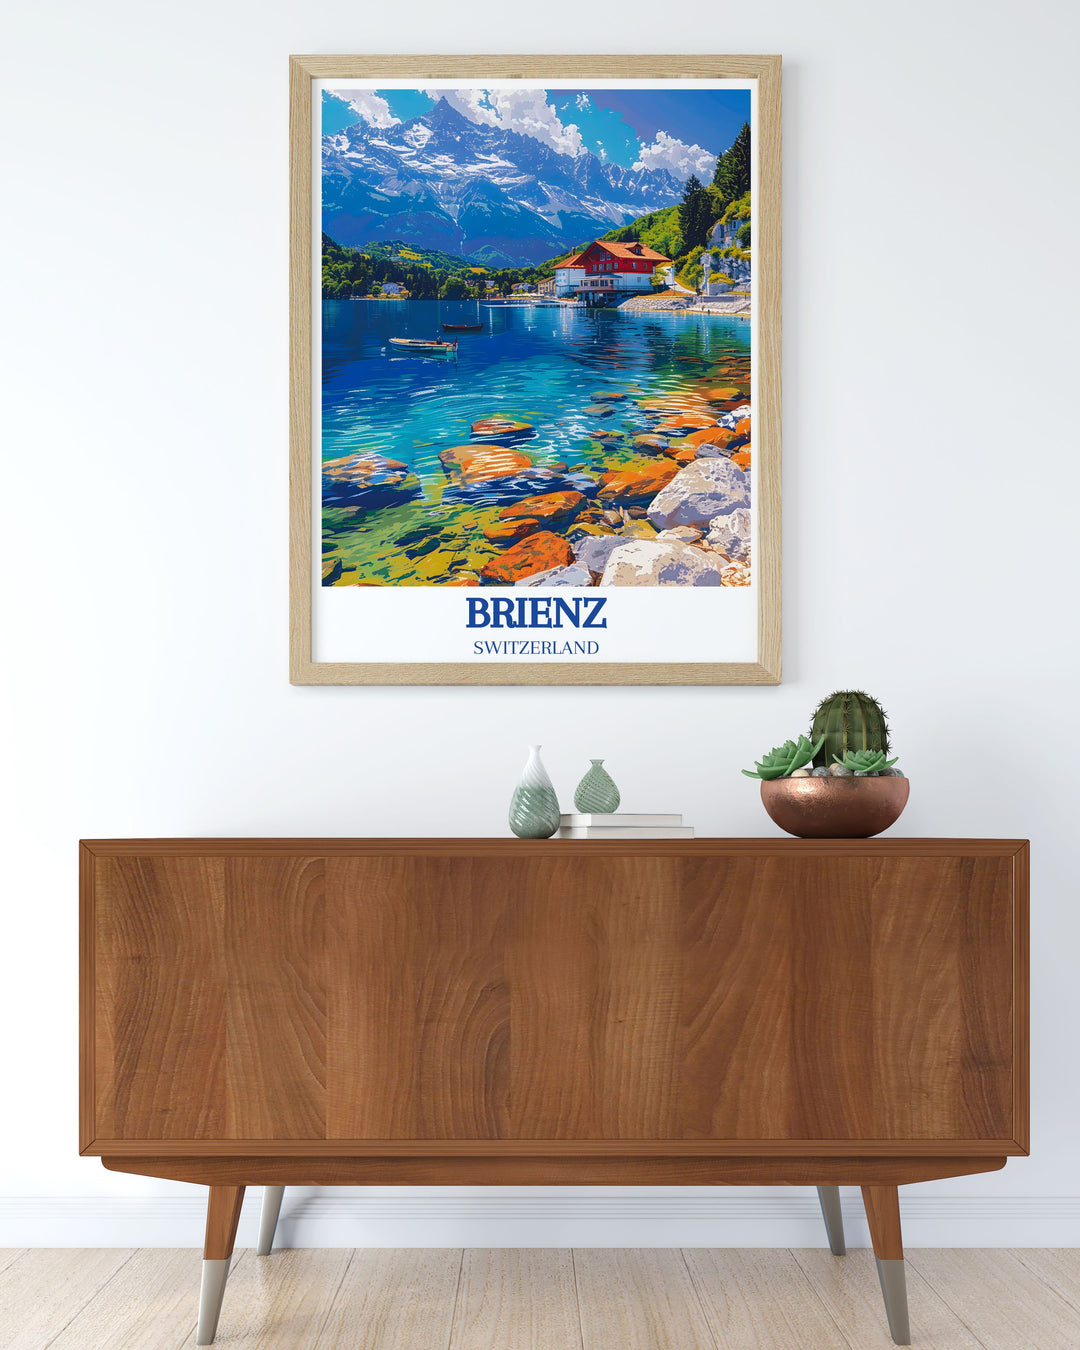 Brienz travel poster featuring Lake Brienz, Brienzer Rothorn. Perfect for adding a touch of Swiss elegance to your home. Retro travel poster capturing the charm of Switzerland. Wonderful wall art print gift.